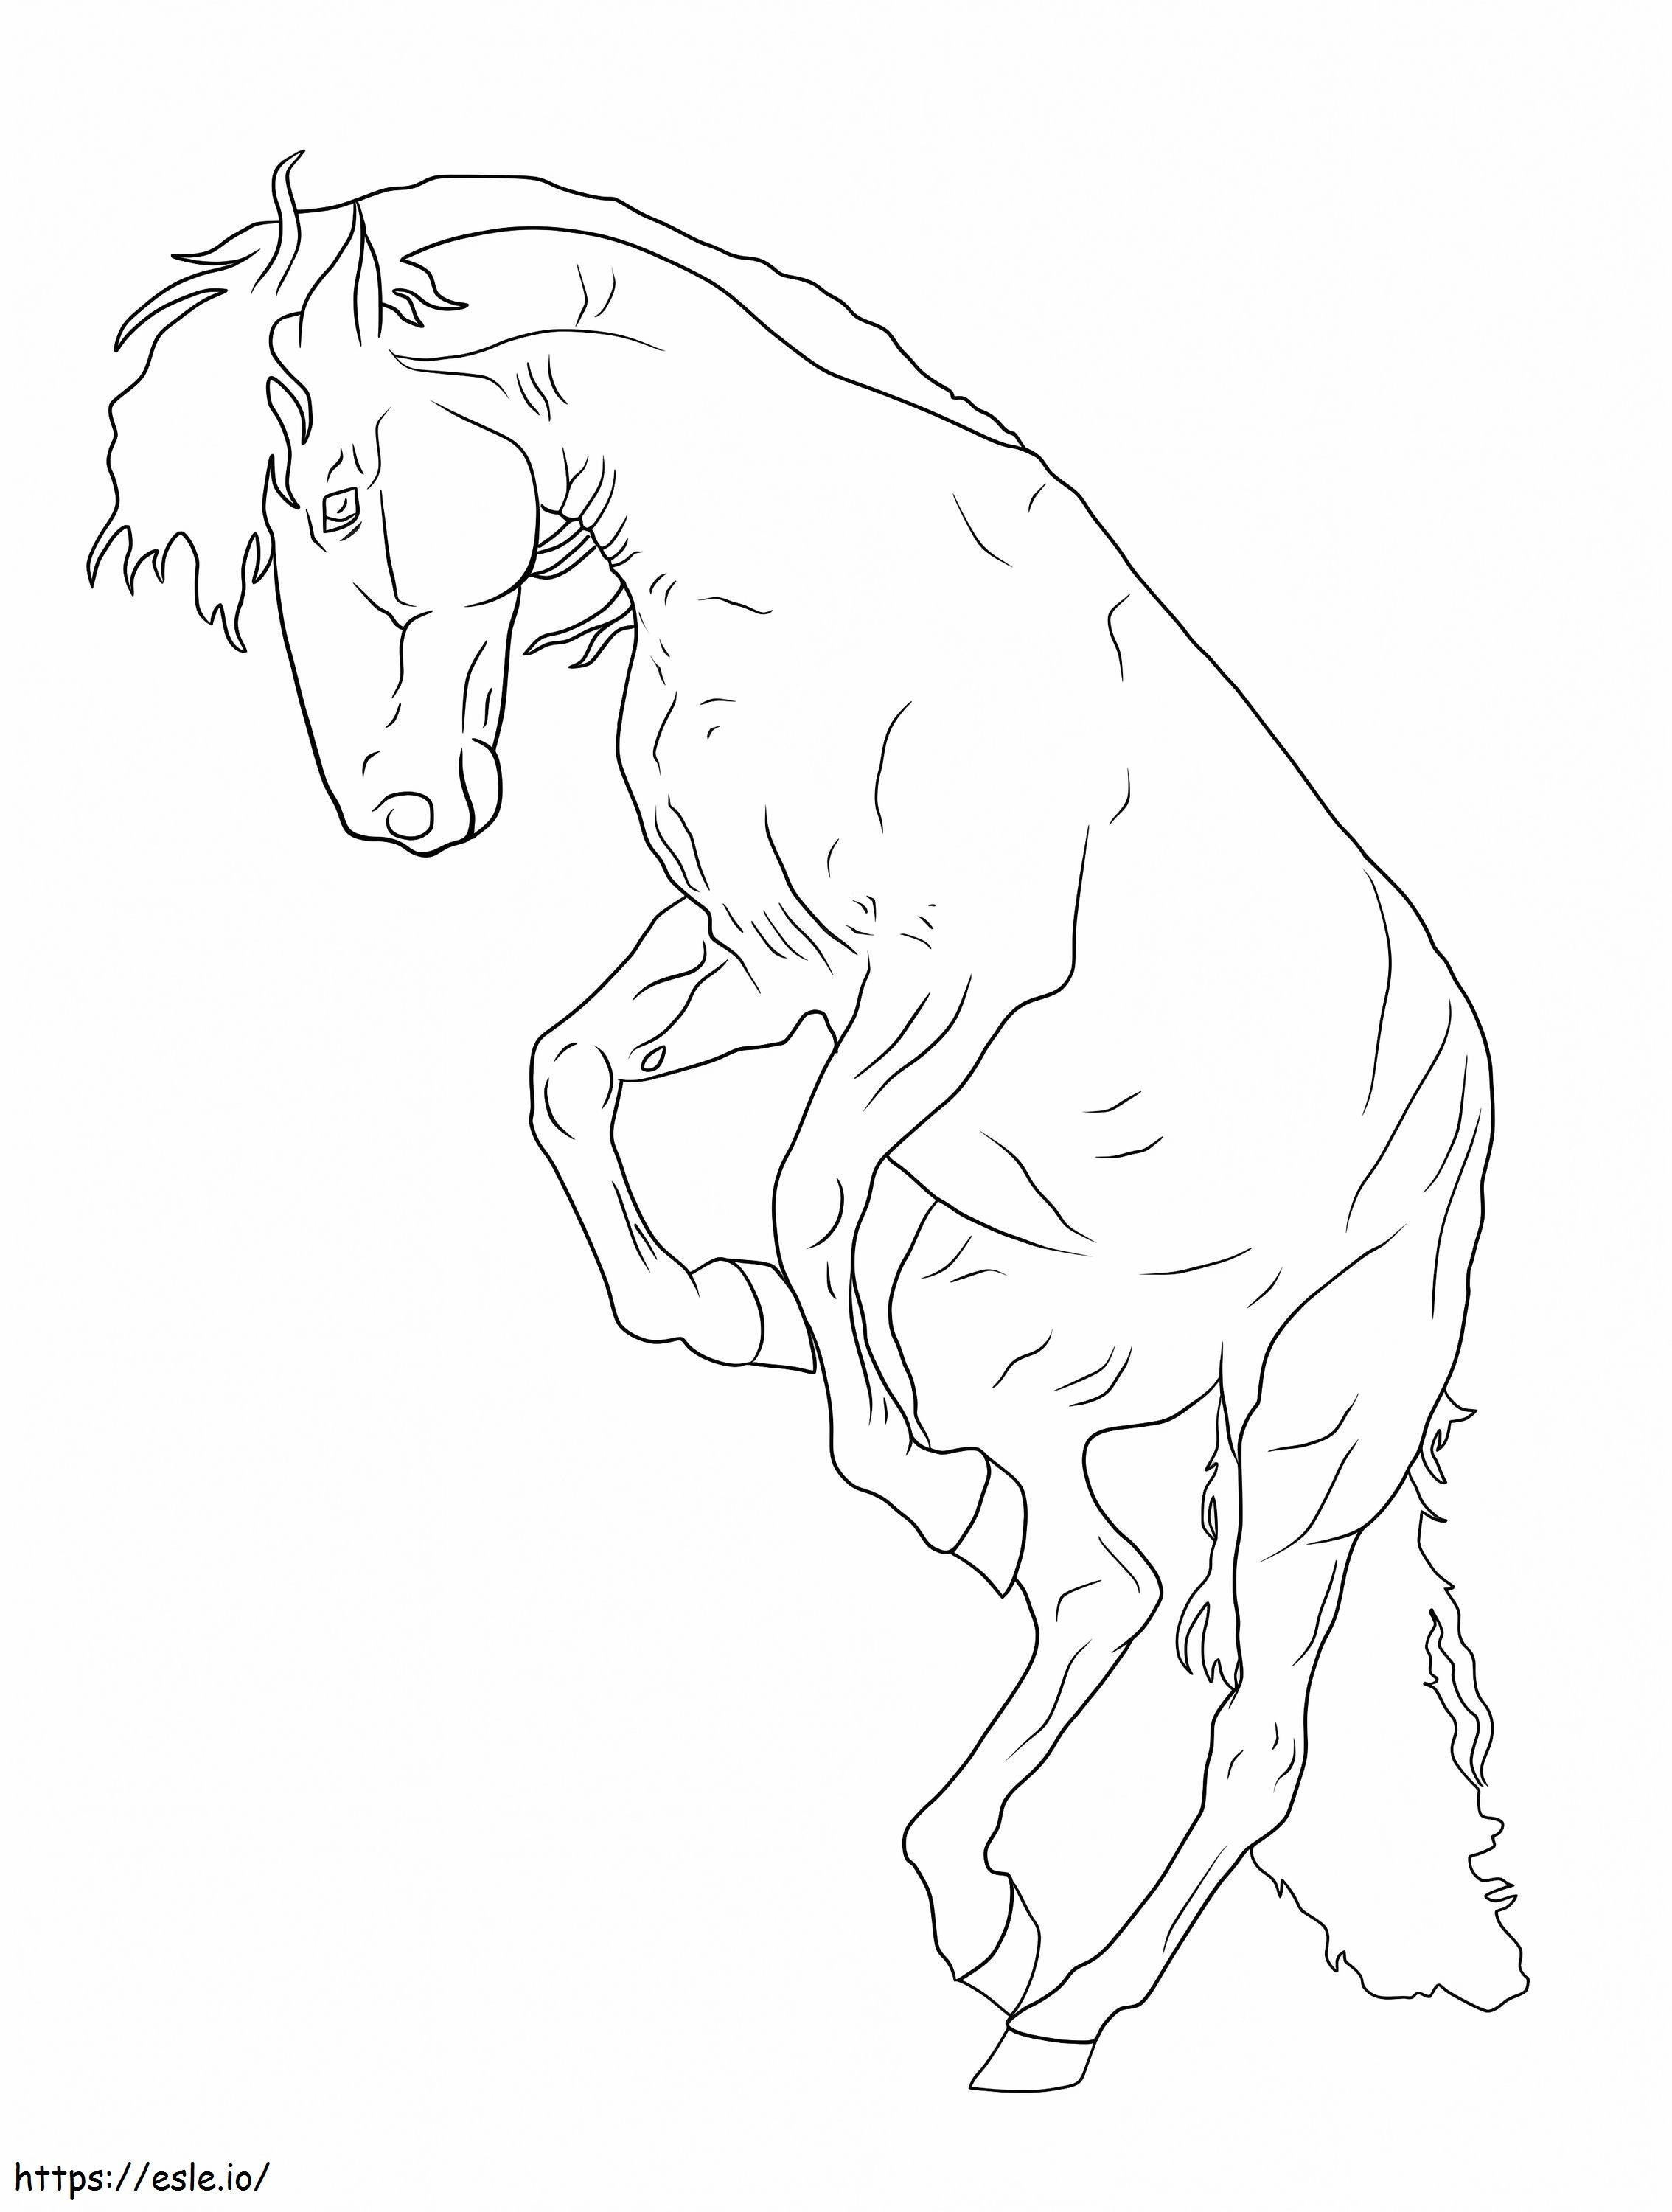 A Horse coloring page